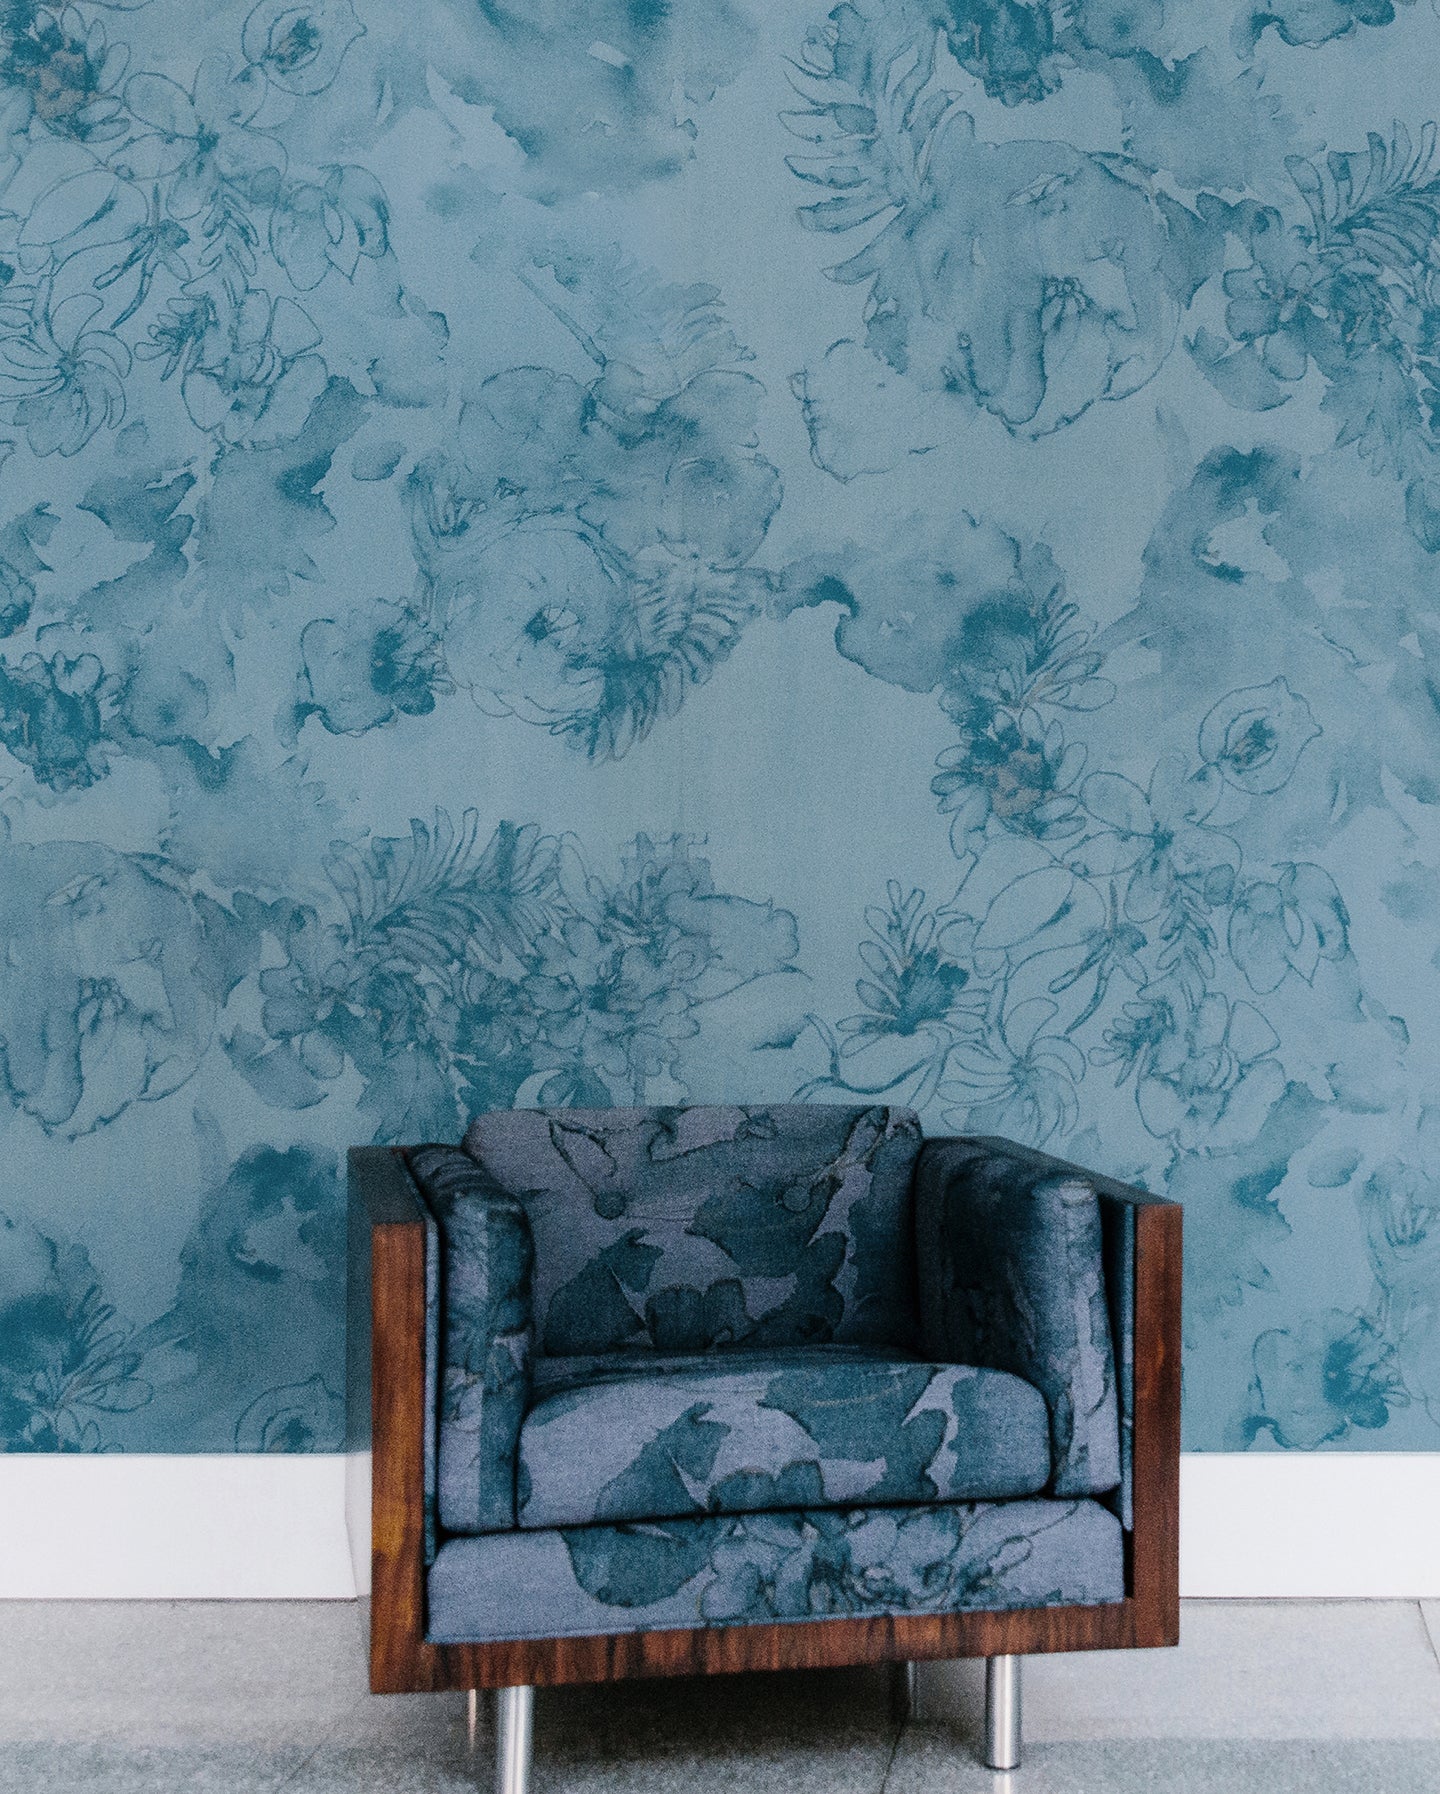 A chair in front of a blue floral wallpaper